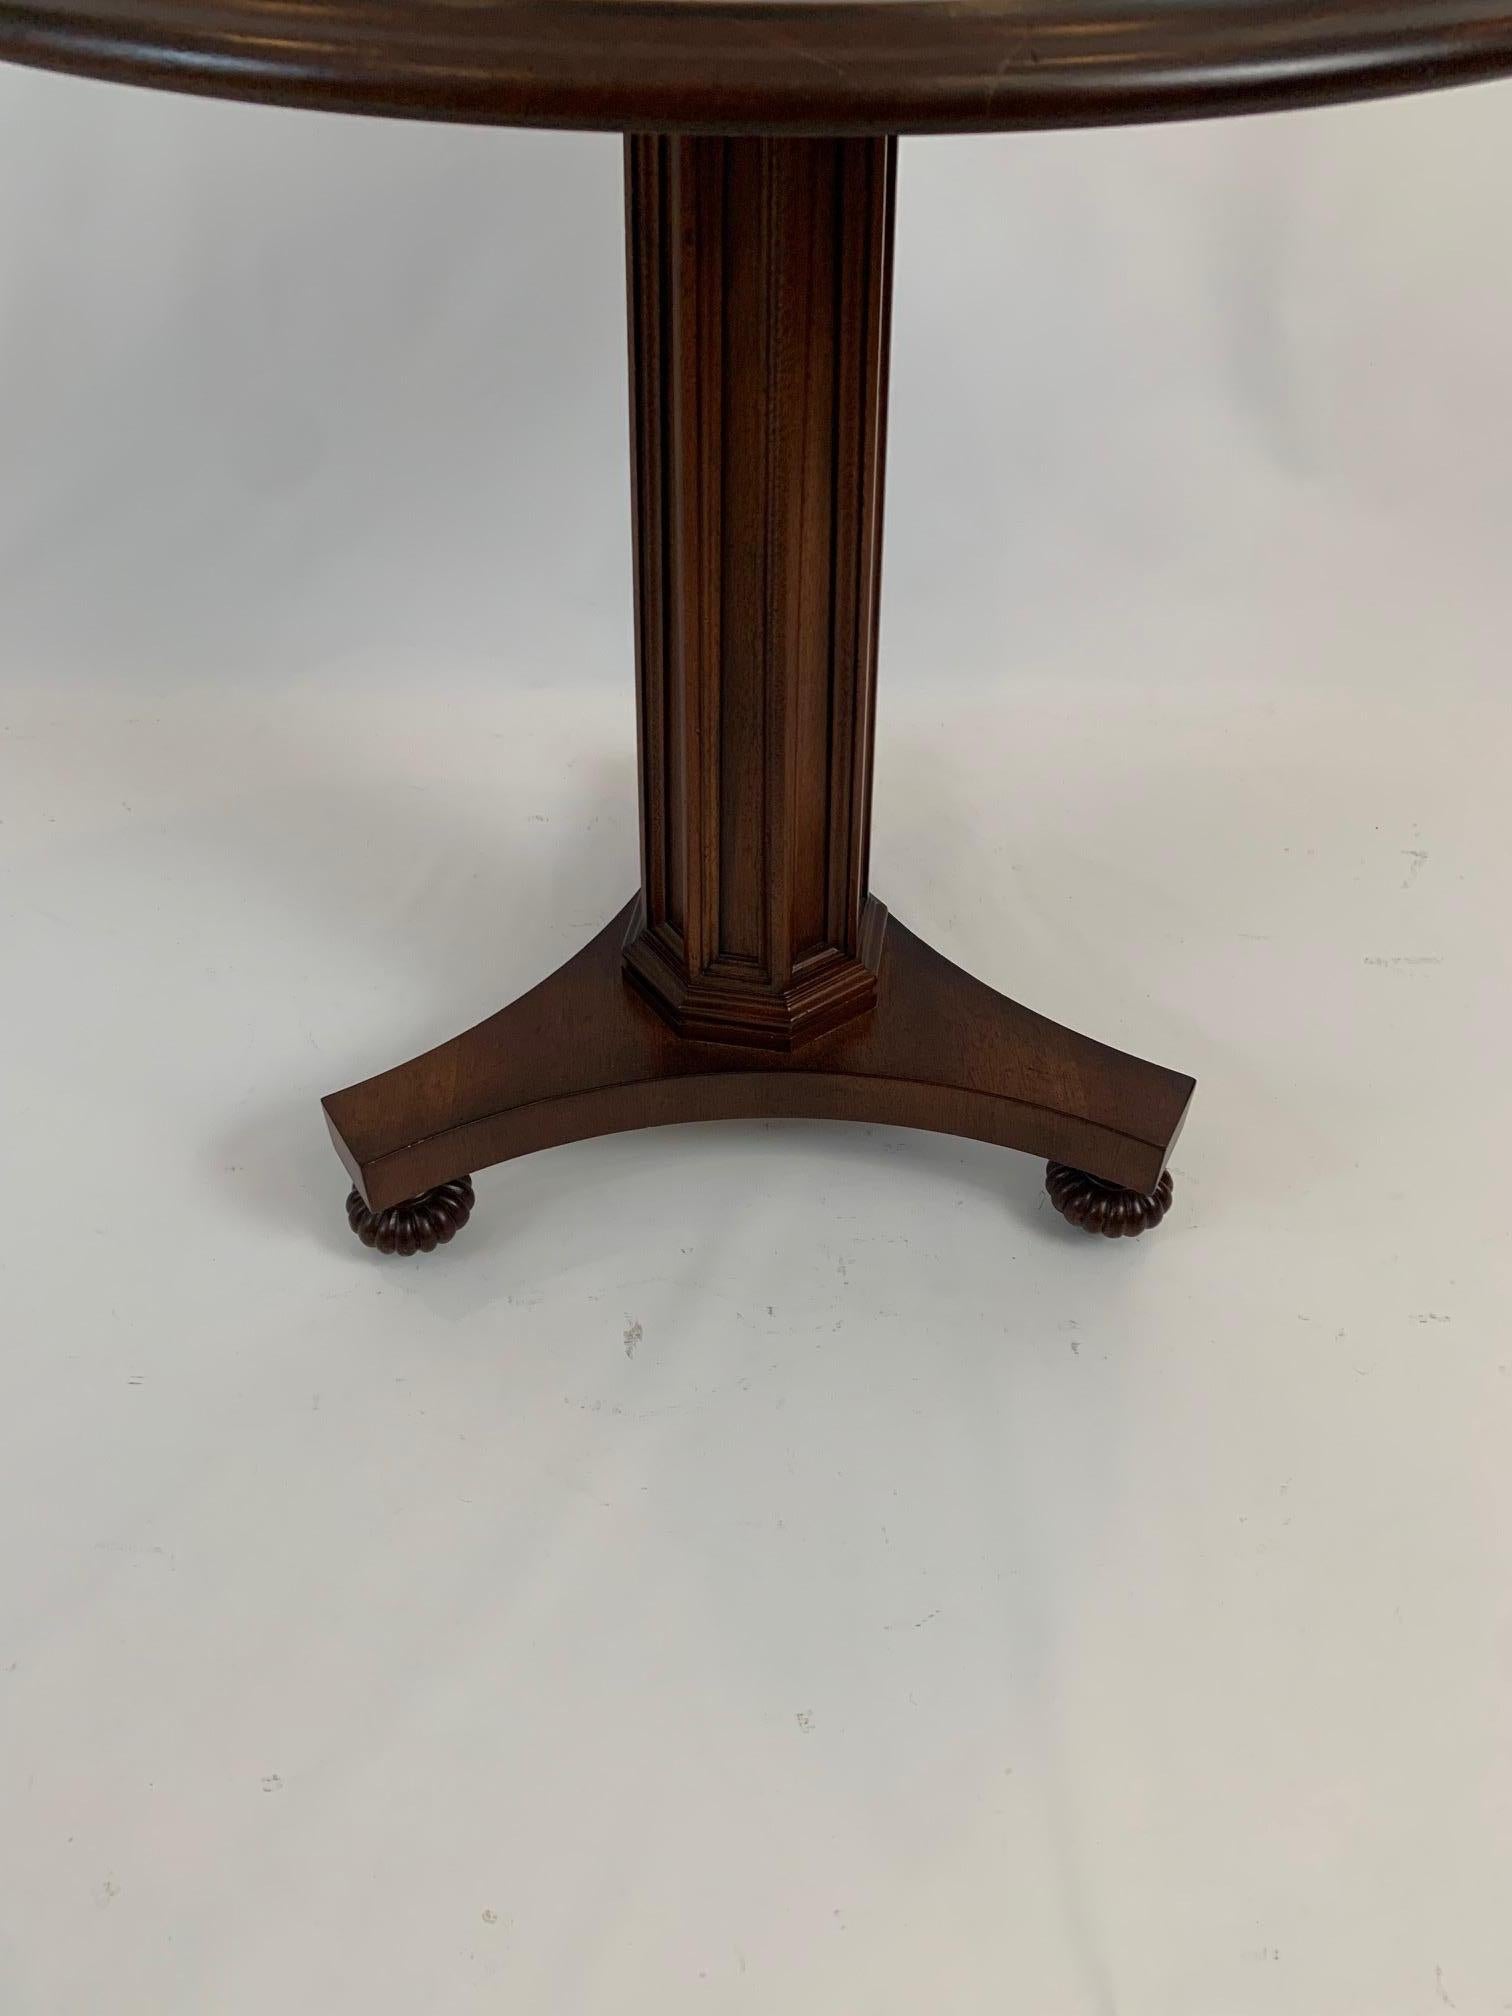 North American Hickory Chair Traditional Flame Mahogany Round Side Table with Lovely Bun Feet